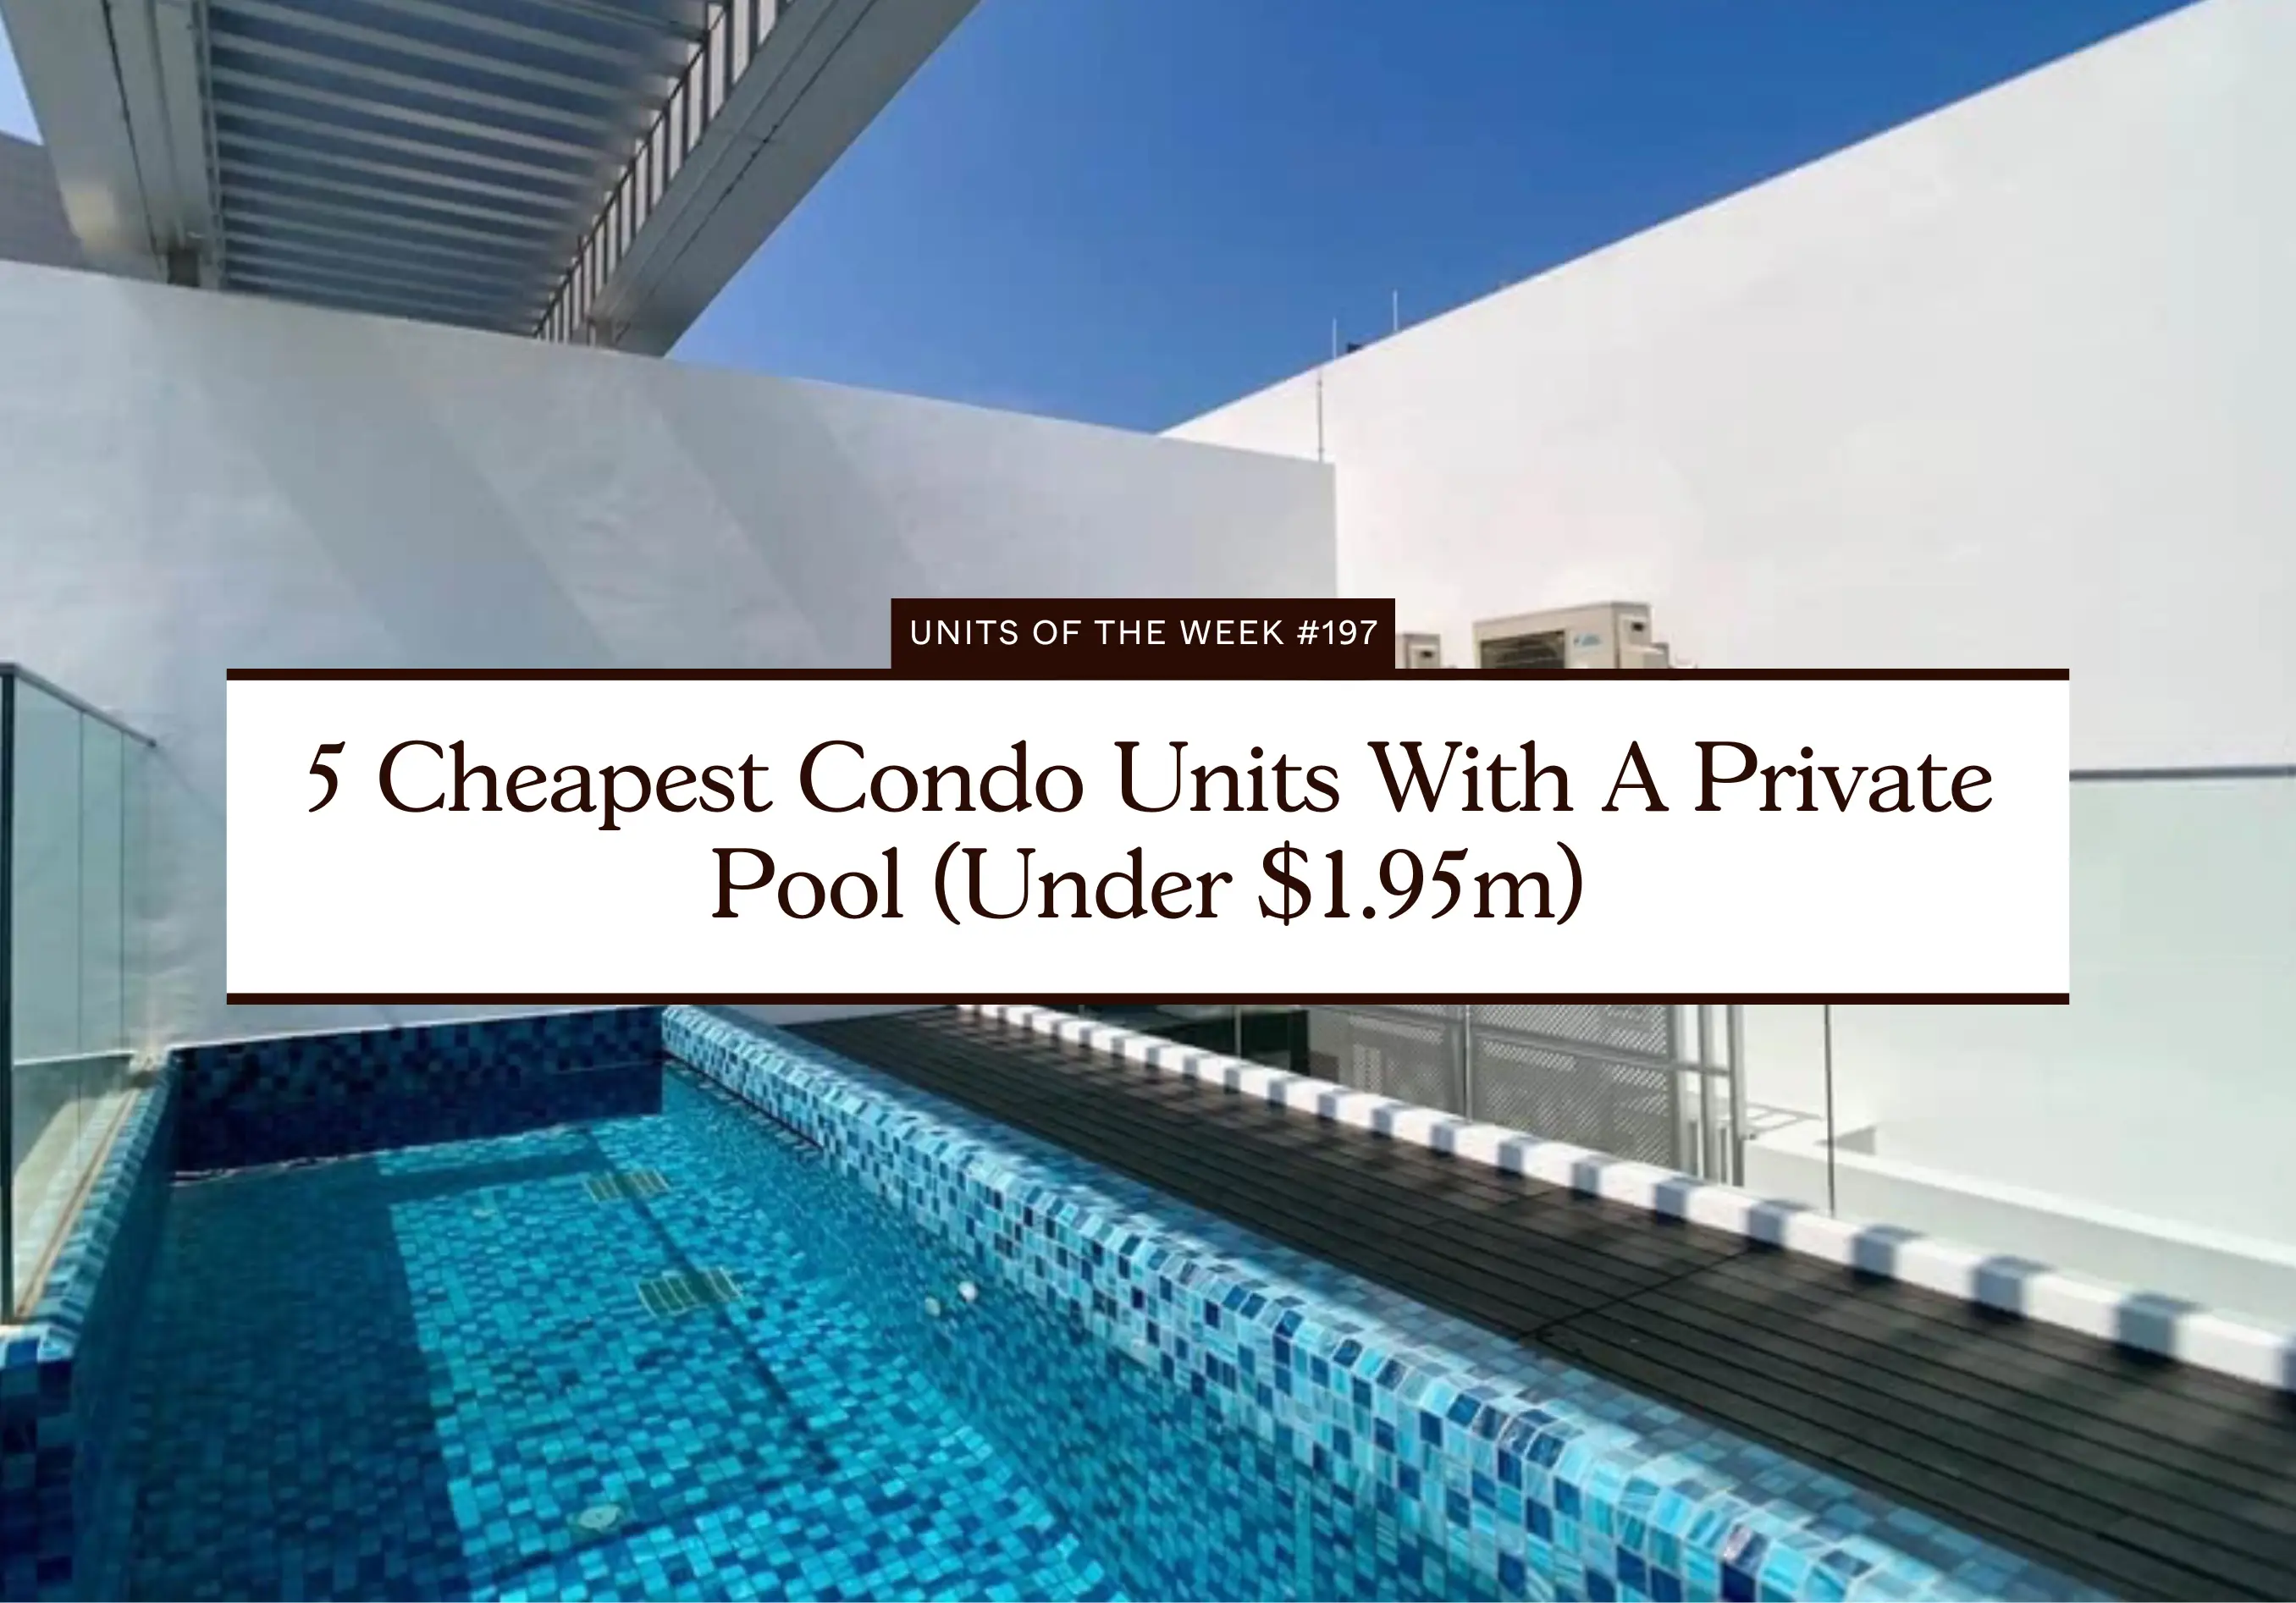 5 Cheapest Condo Units With A Private Pool (Under $1.95m)